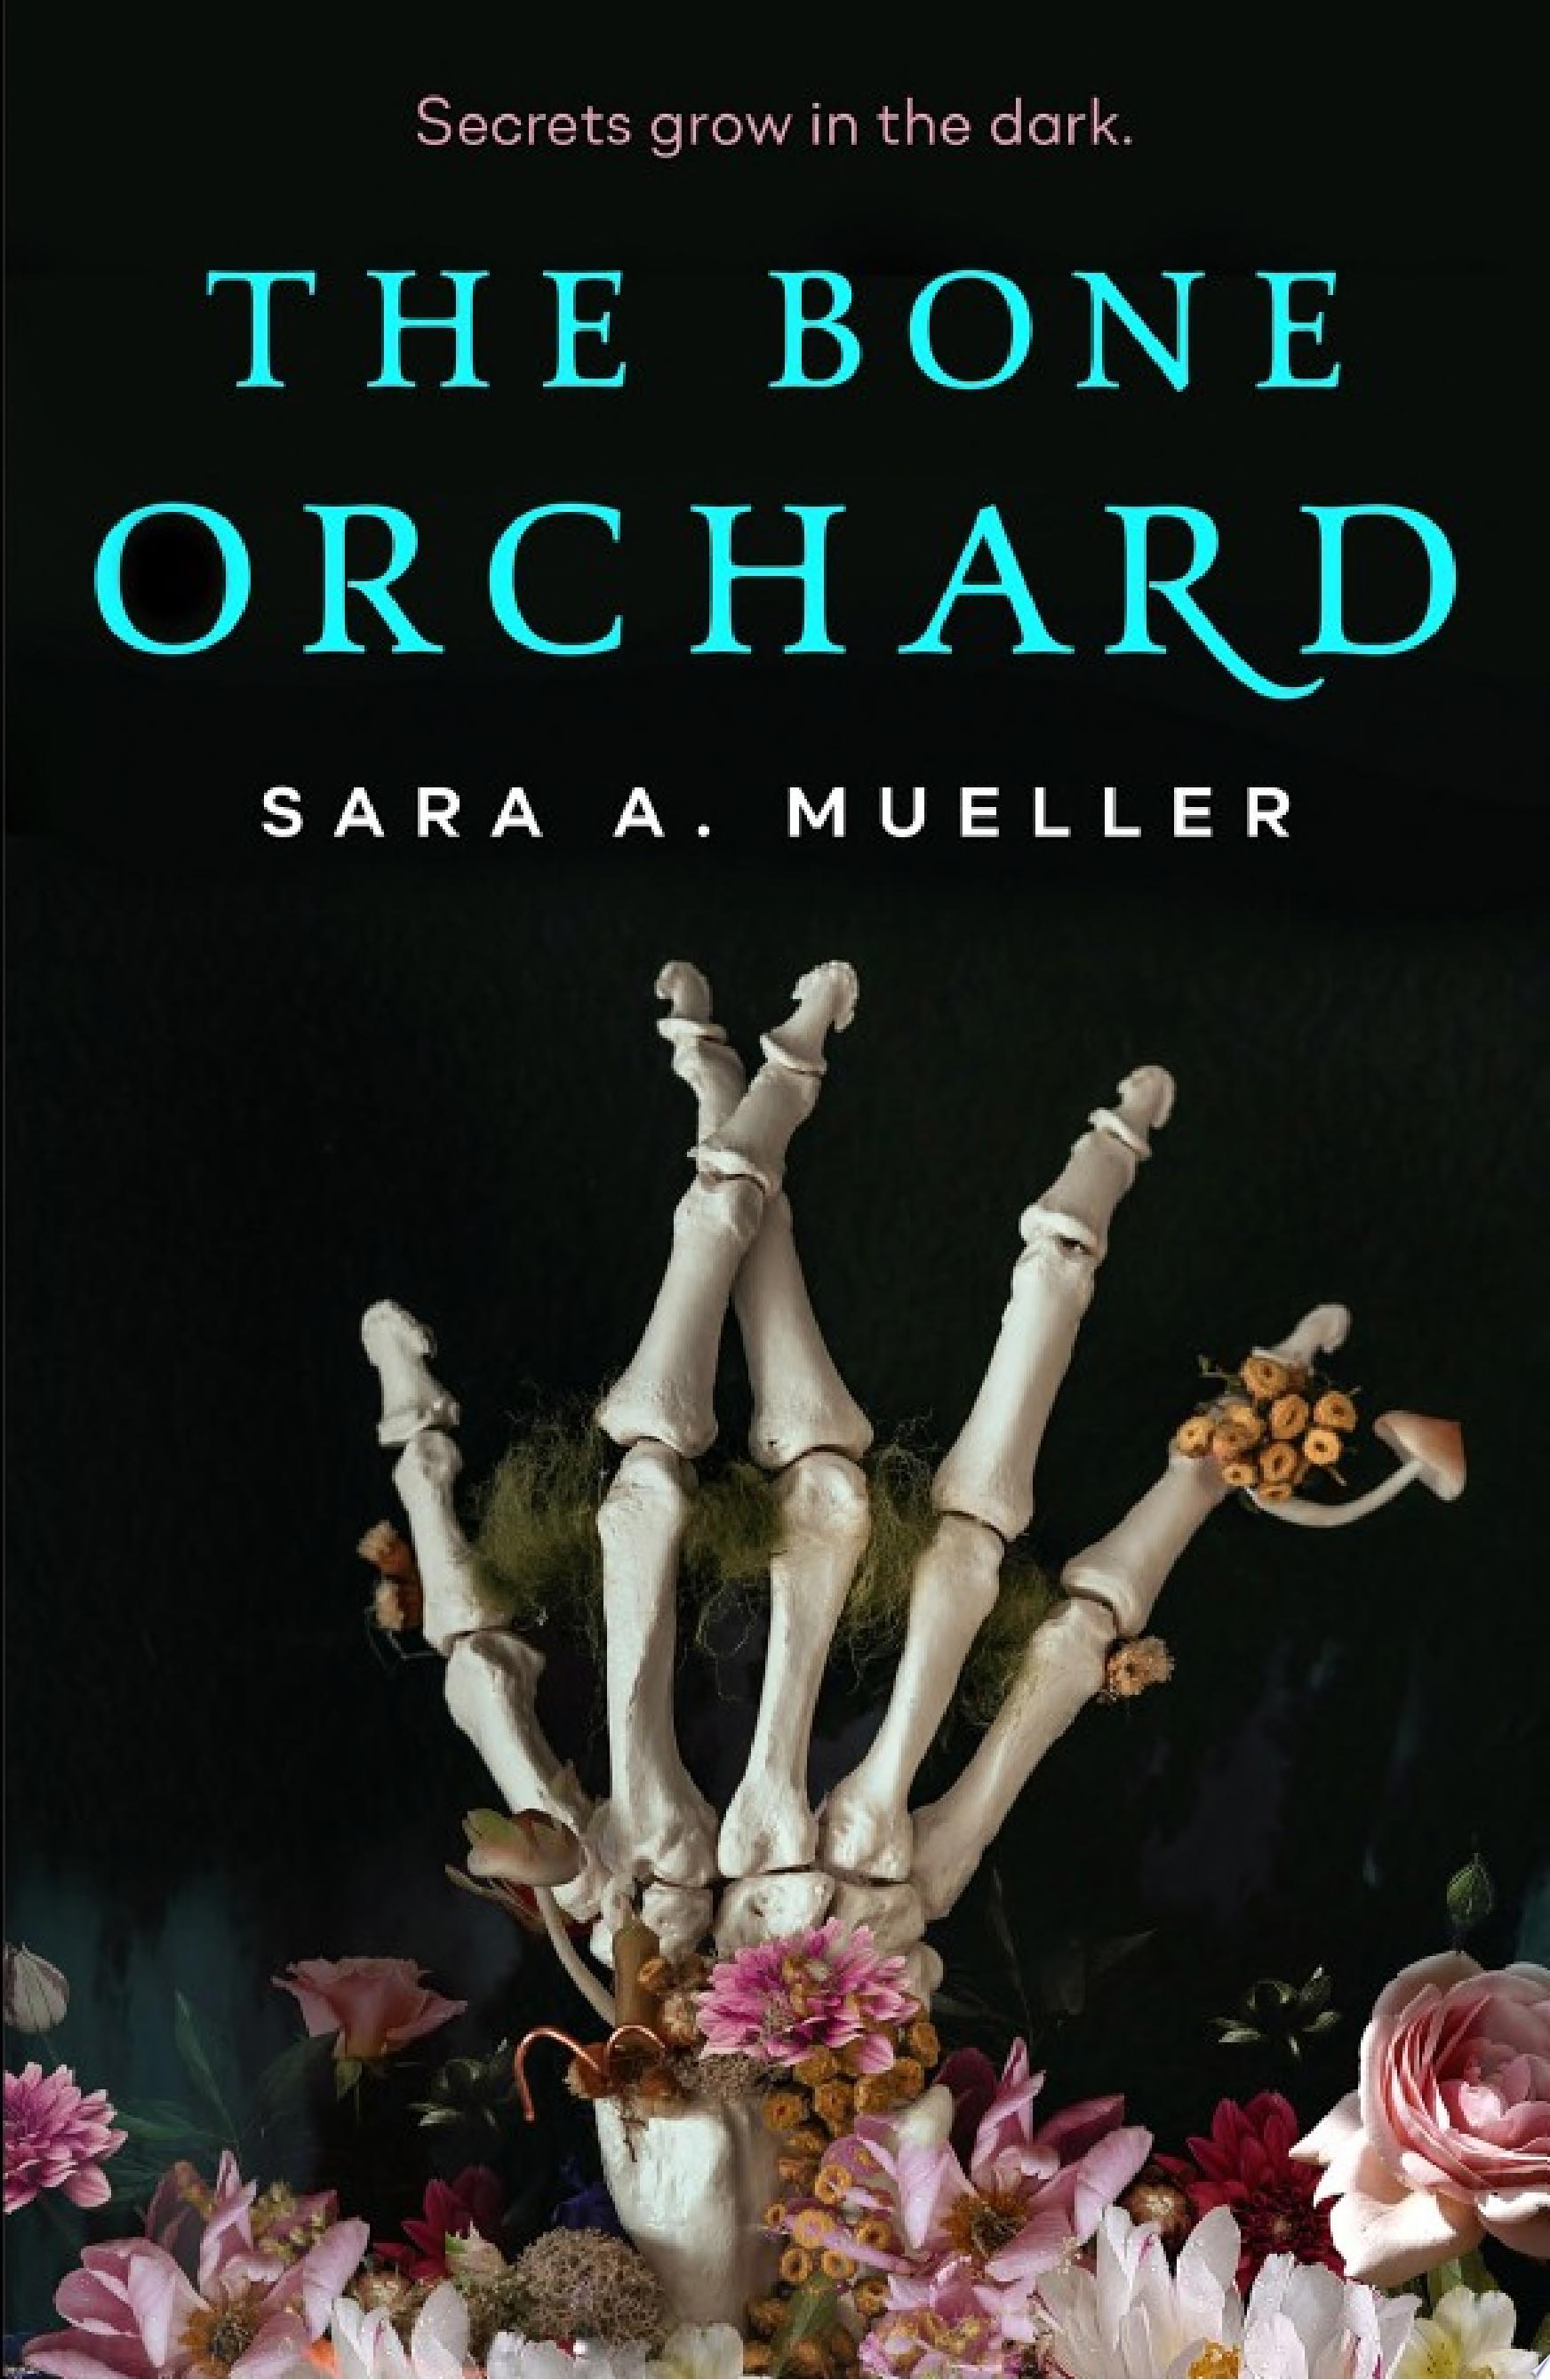 Image for "The Bone Orchard"